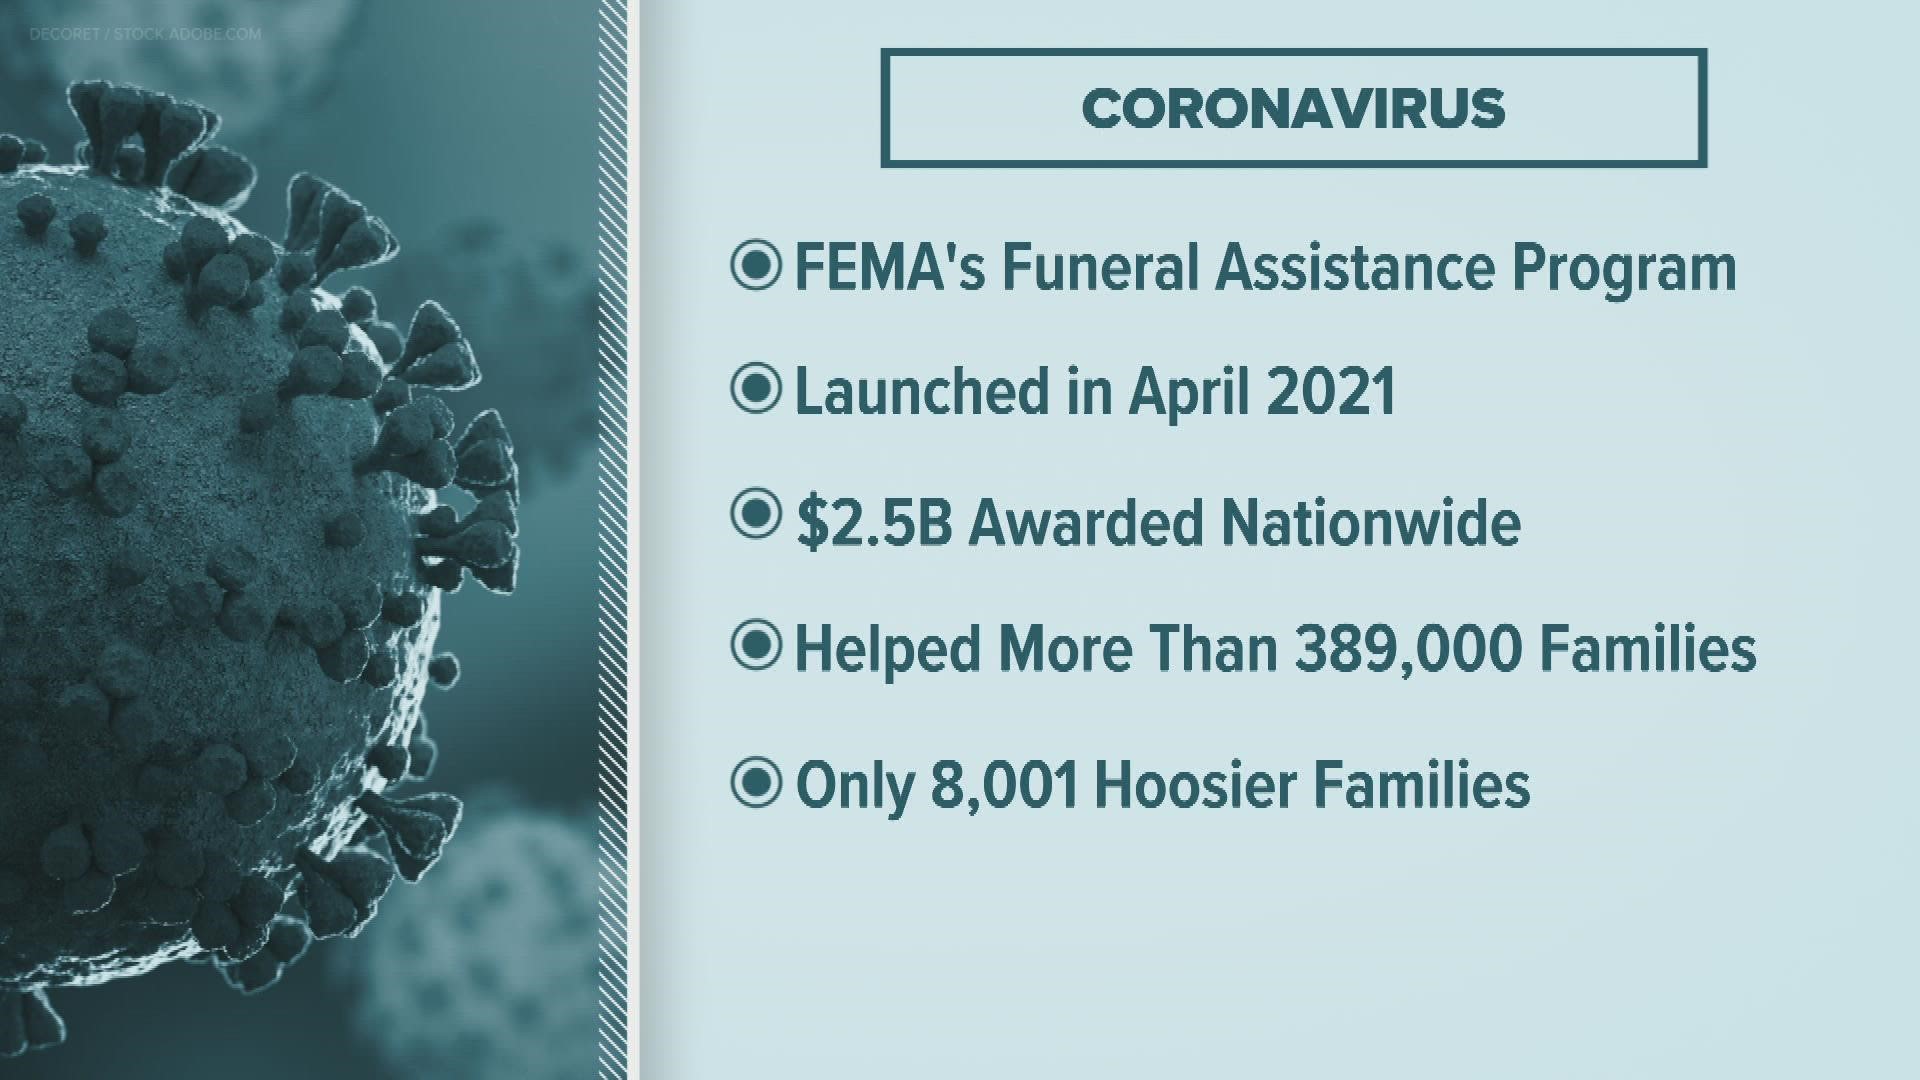 In Indiana, 10,558 families have applied for funeral assistance. Just over 8,000 of those families have been awarded.